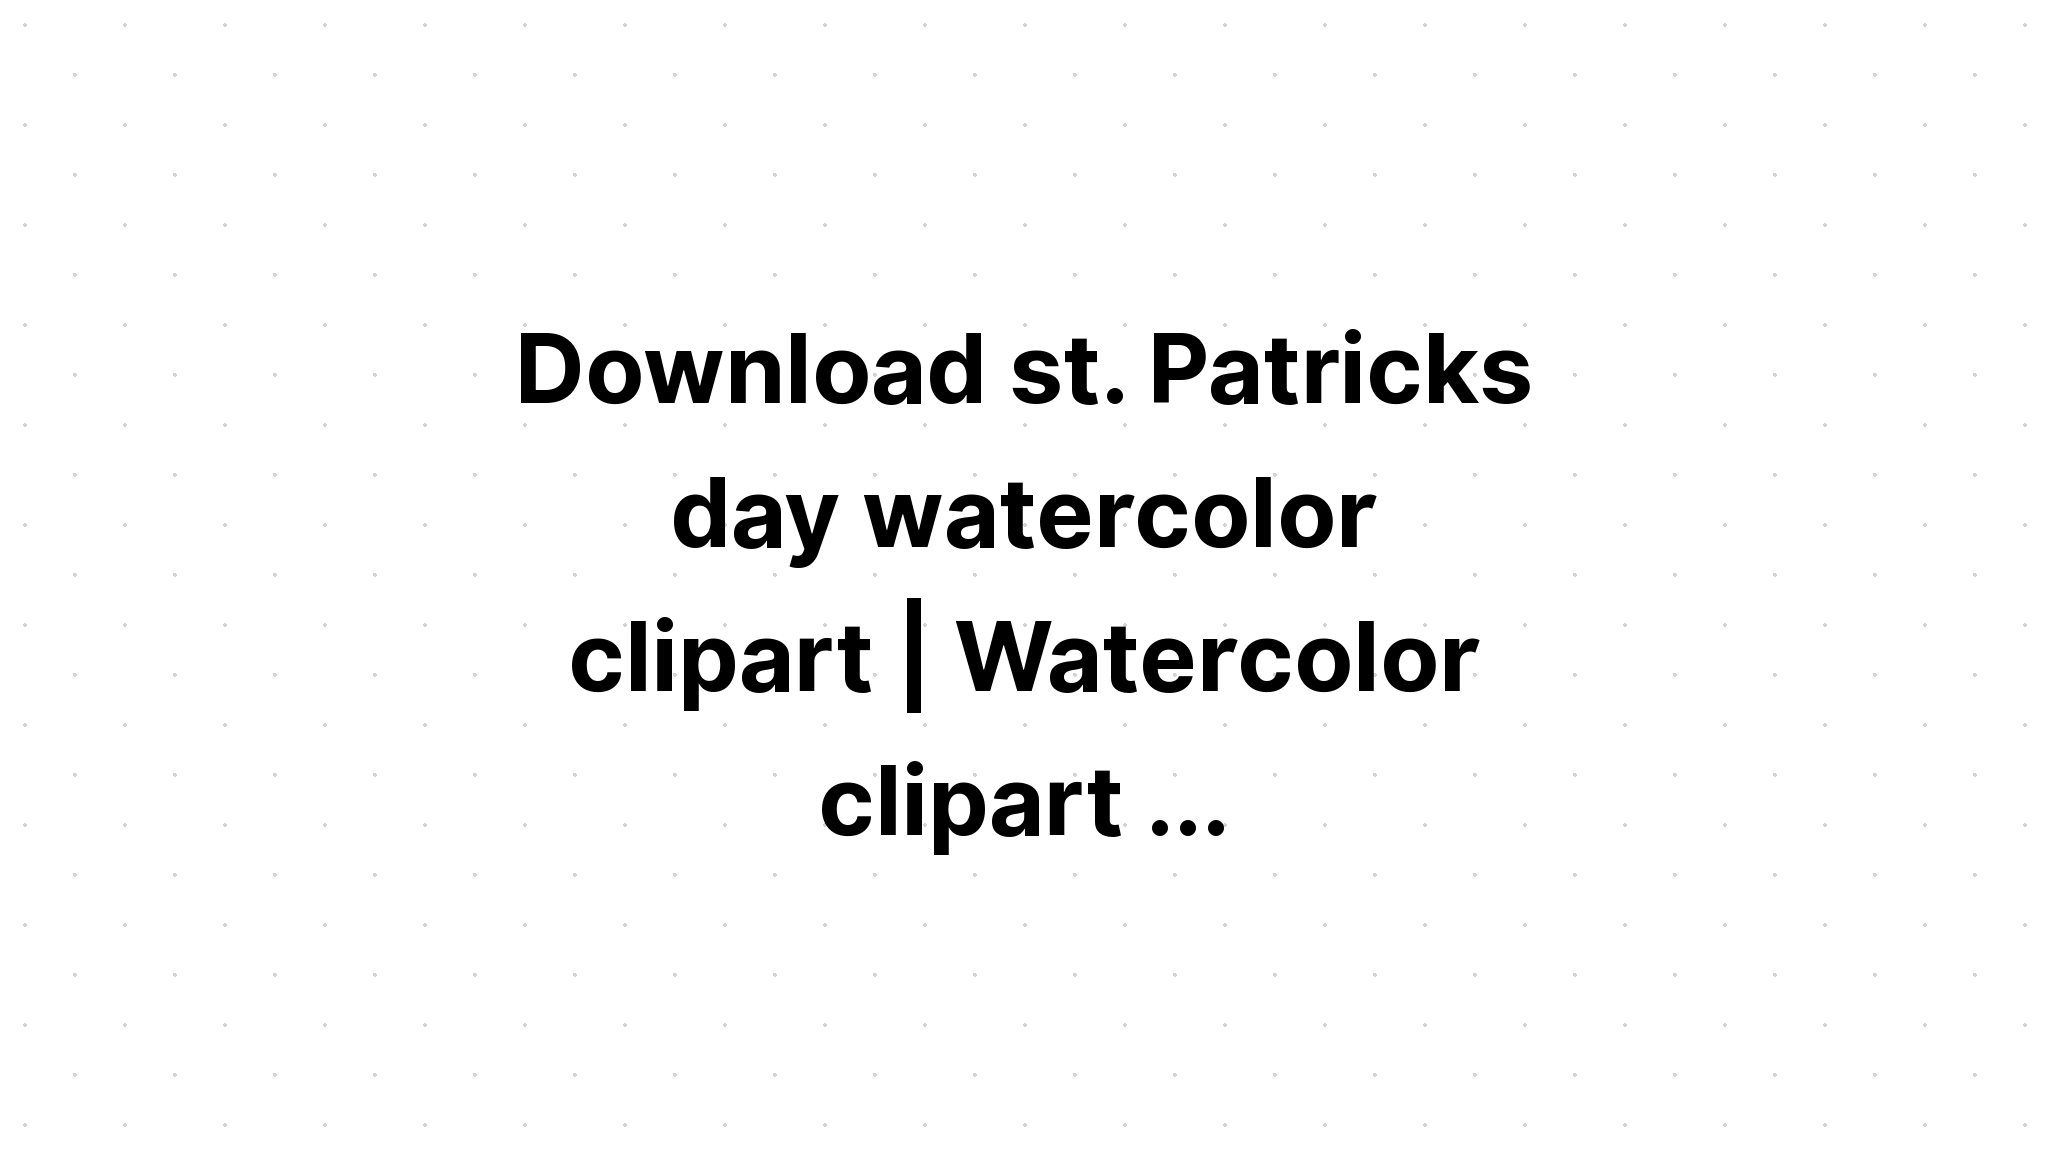 Download Watercolor St Patrick's Day Clipart SVG File